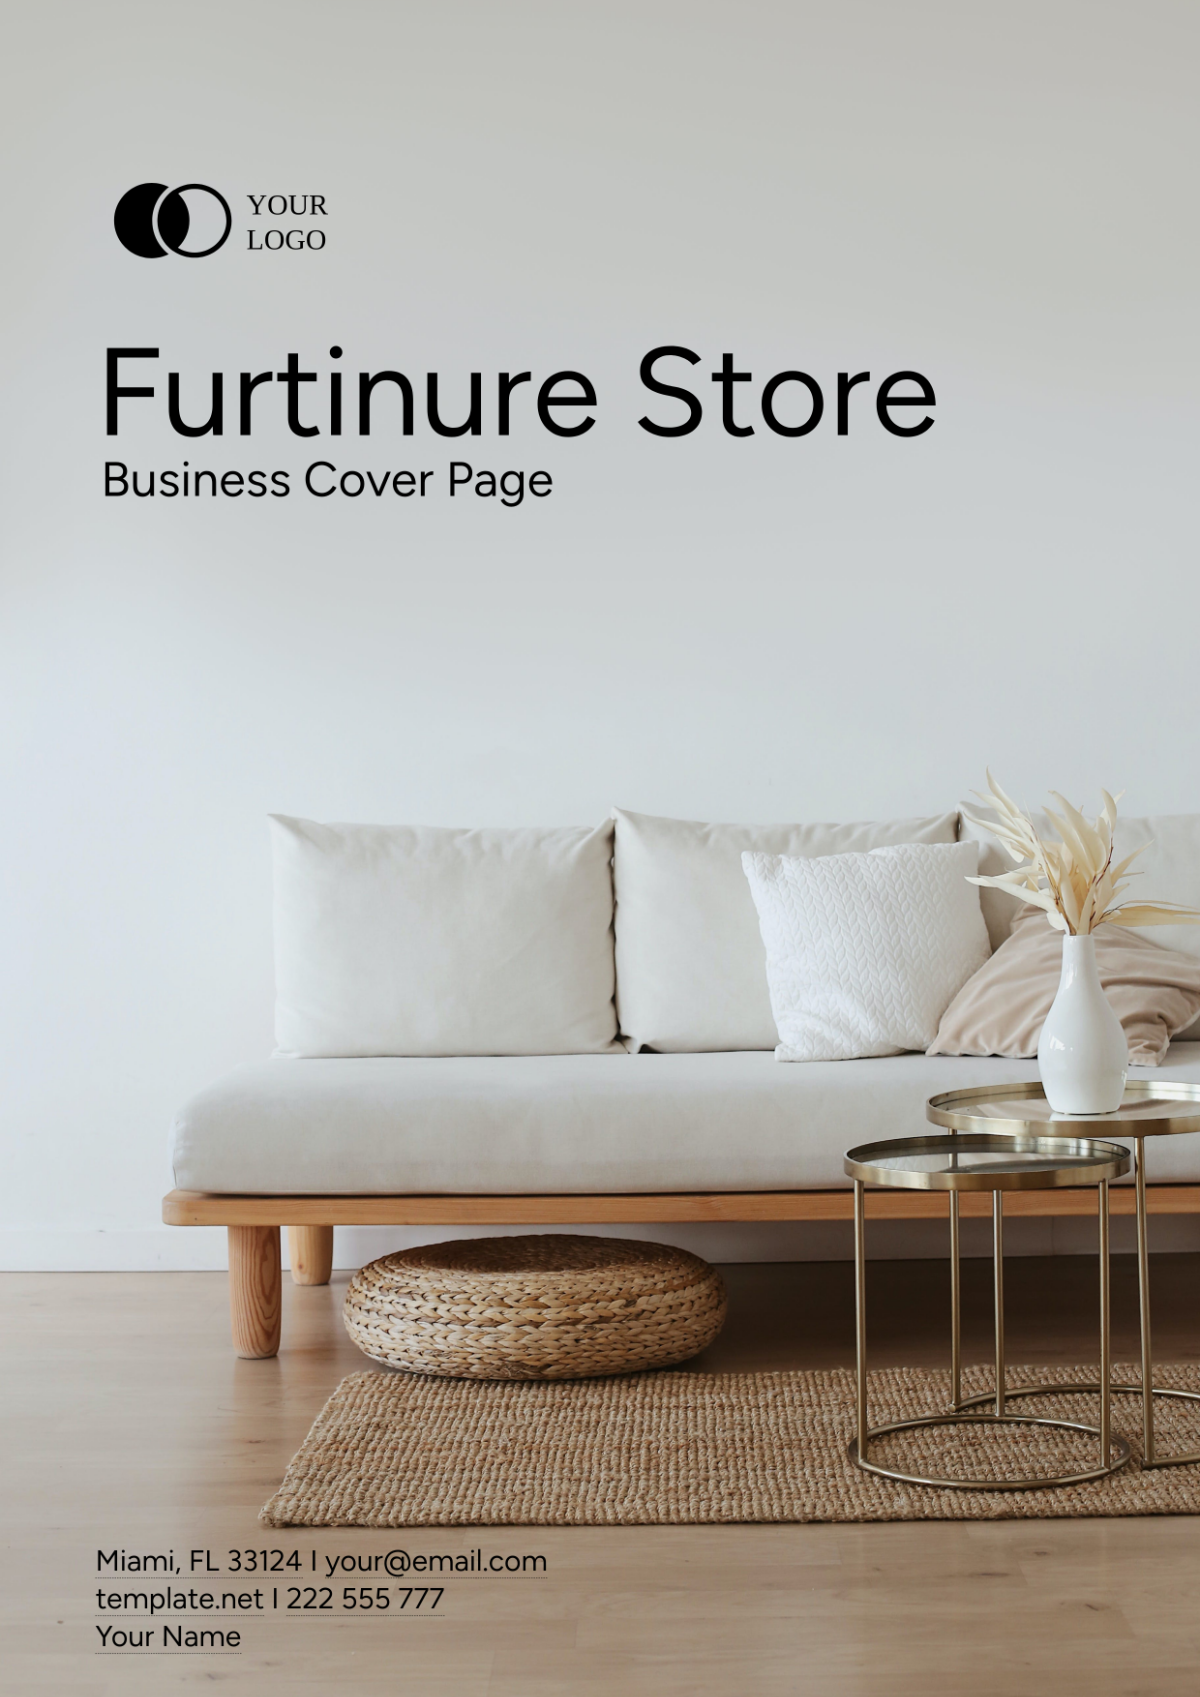 Furniture Store Business Cover Page Template